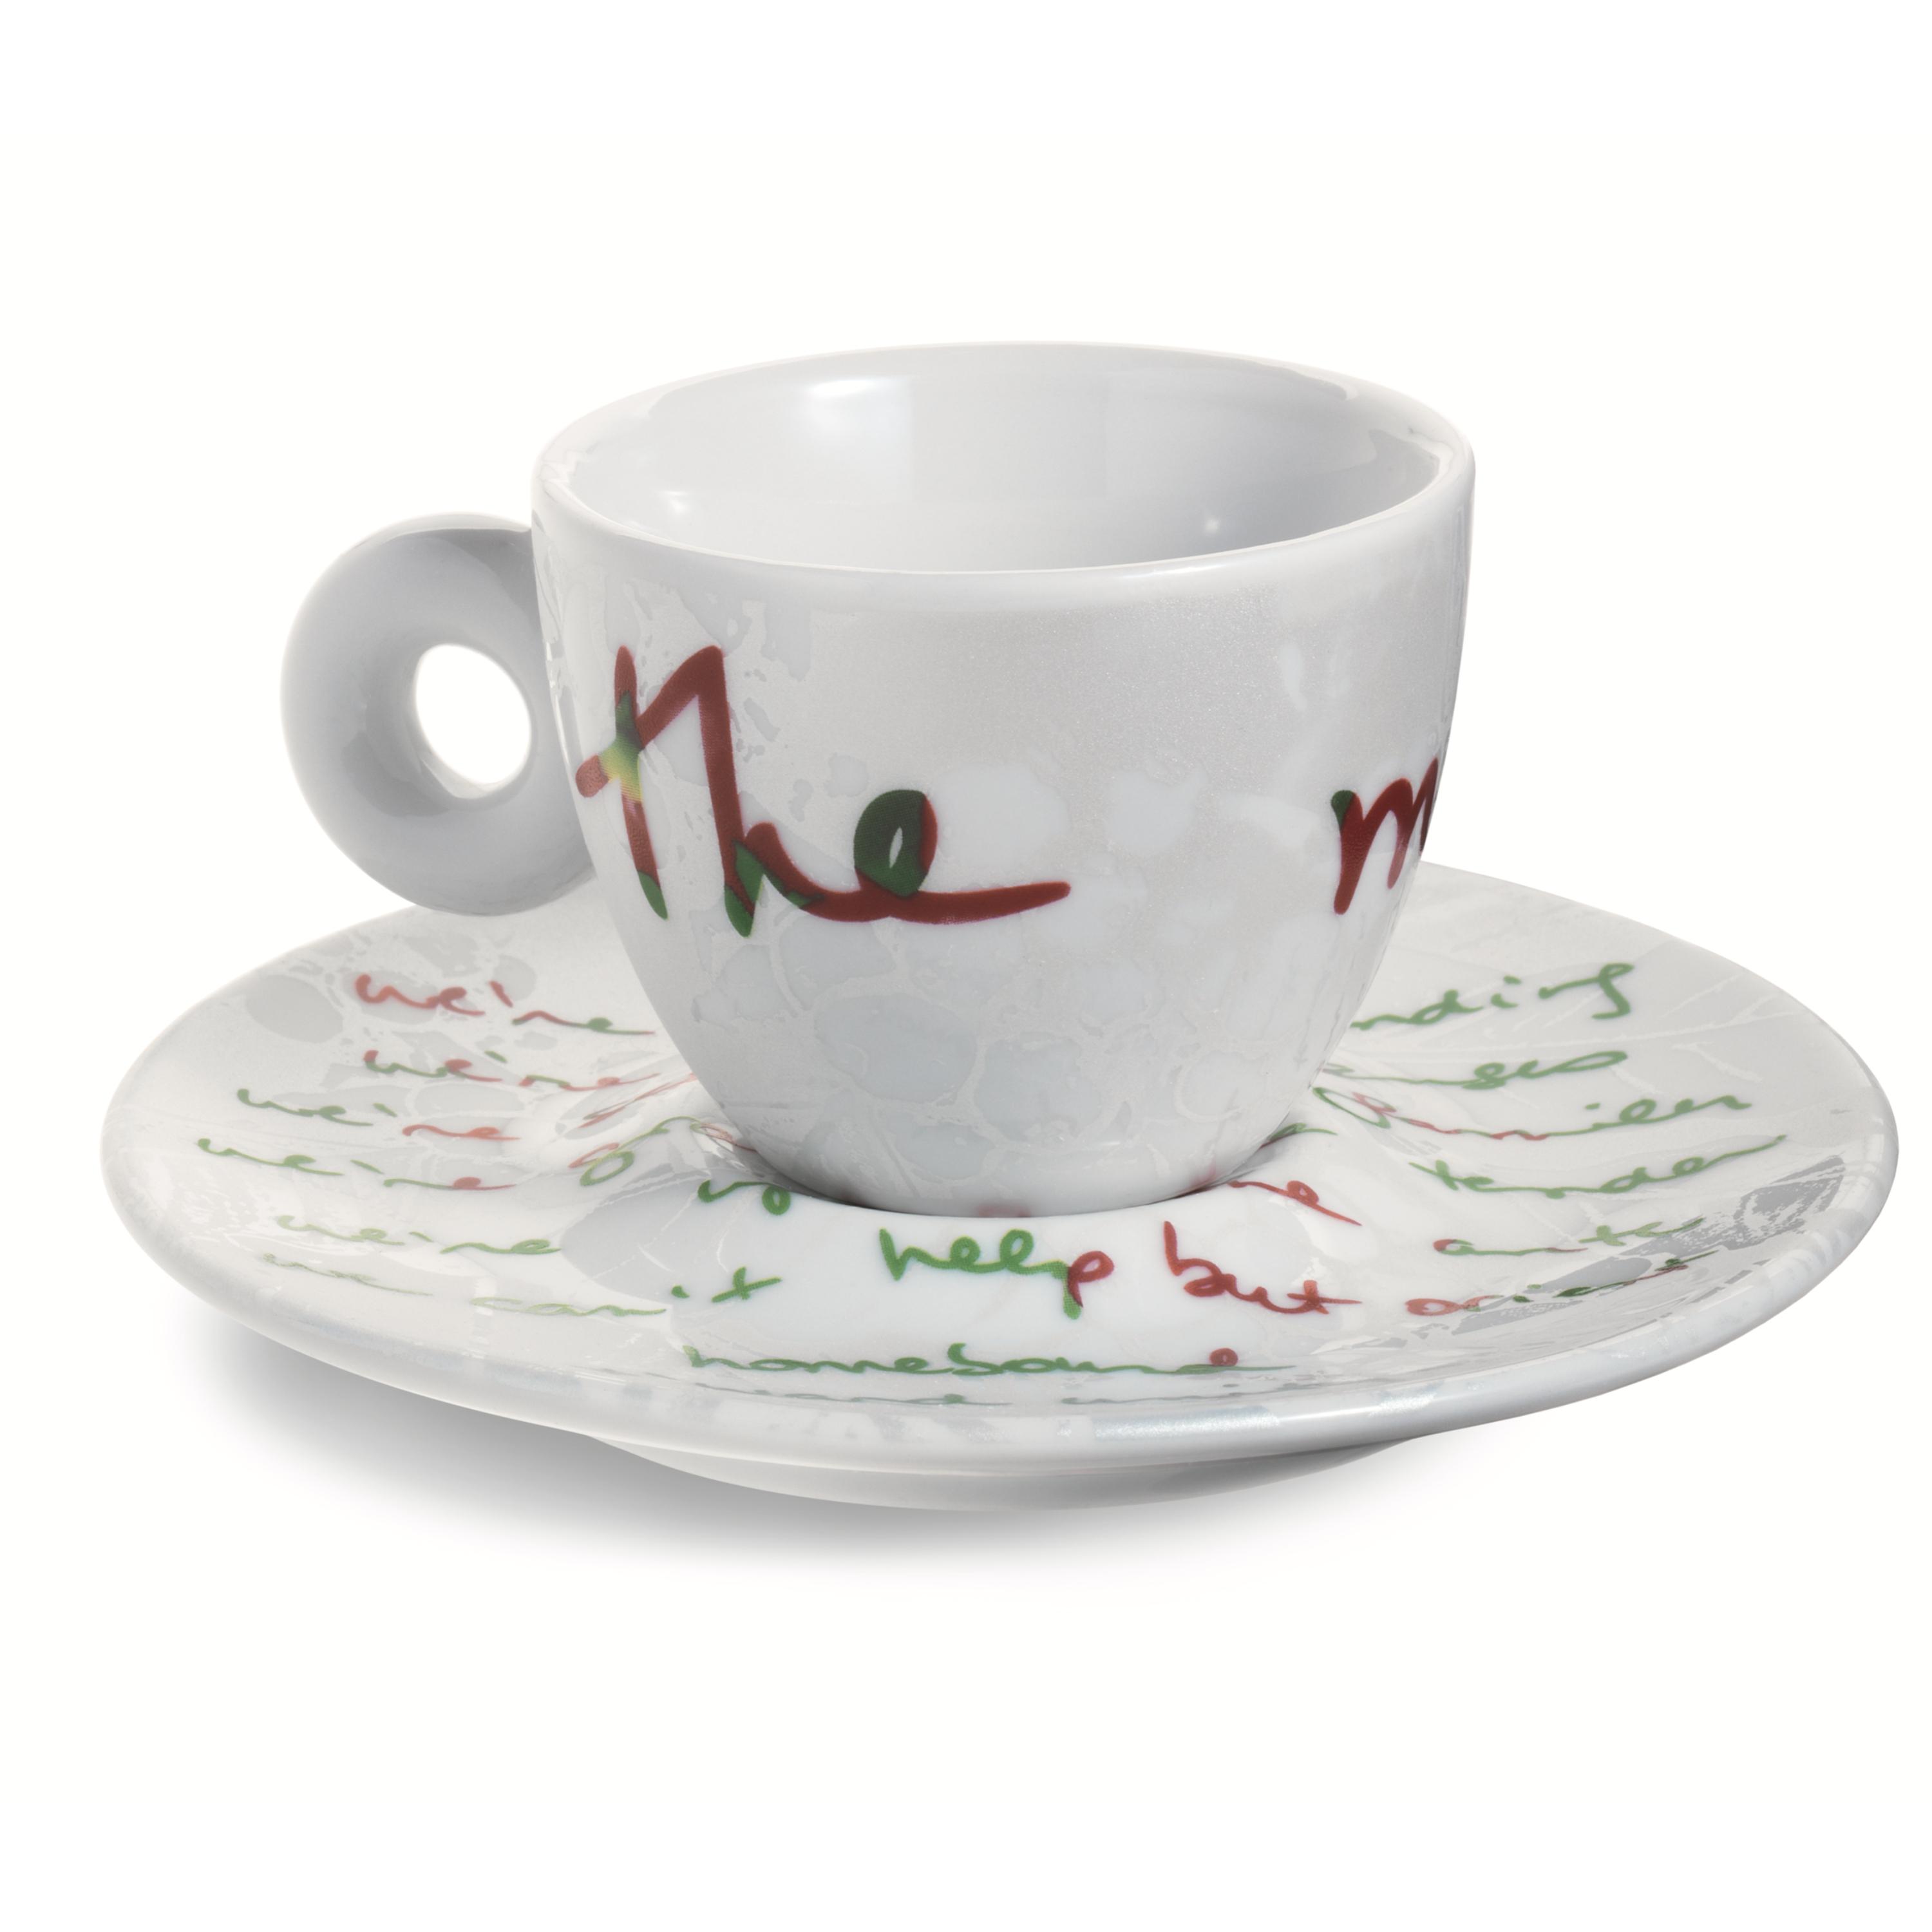 illy Art Collection ALANIS MORISSETTE Gift Set 2 Espresso Cups + 250gr illy Espresso Ground + DVD, Cups, 02-02-6024